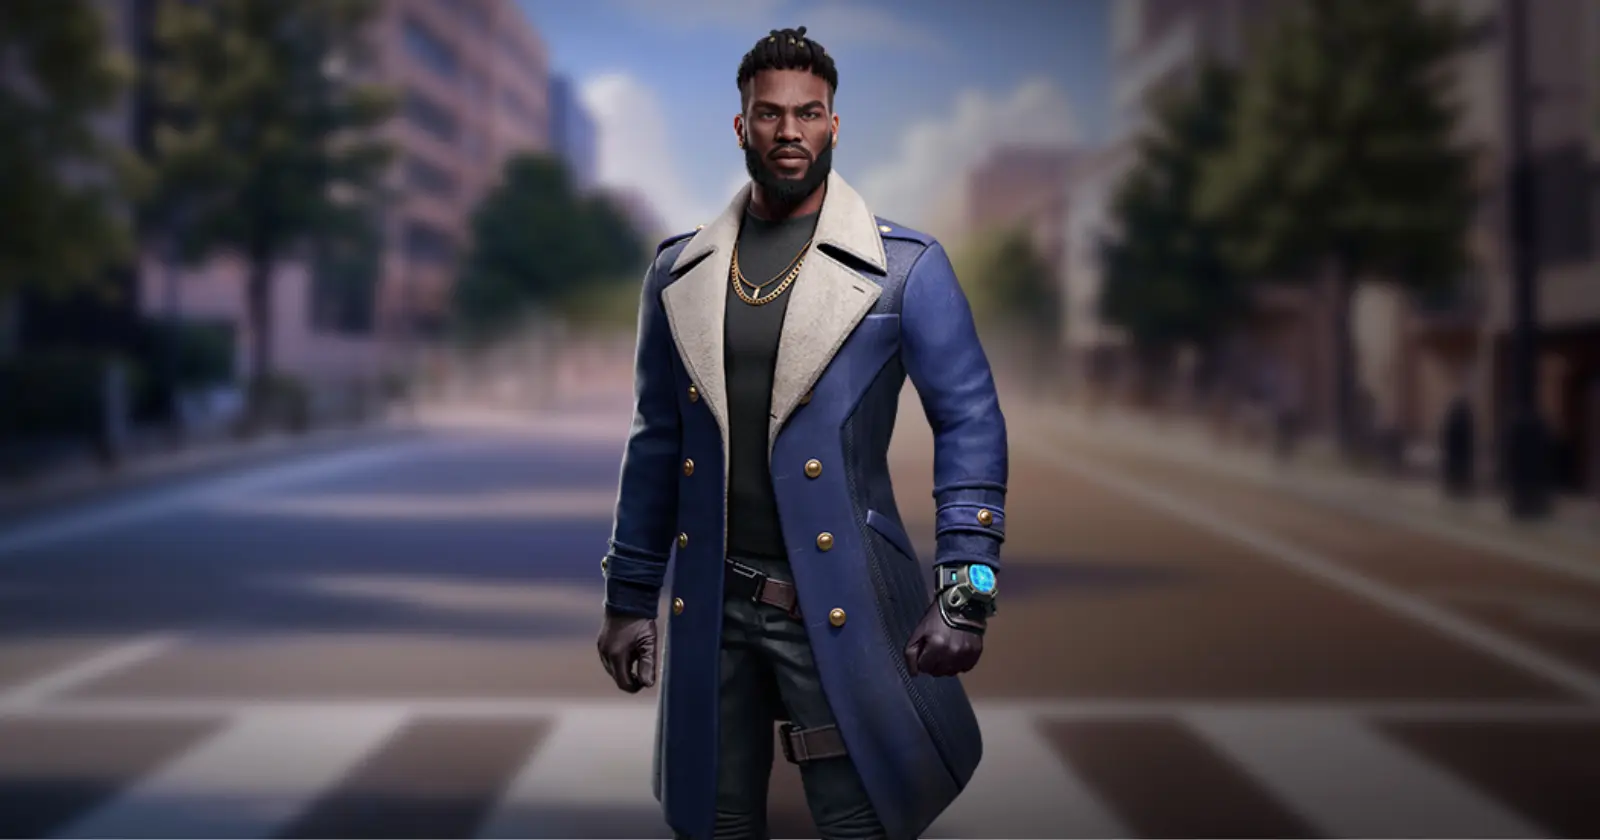 A blackfaced ford character stands on a city street wearing a long blue coat, black pants and accessories including a gold necklace.